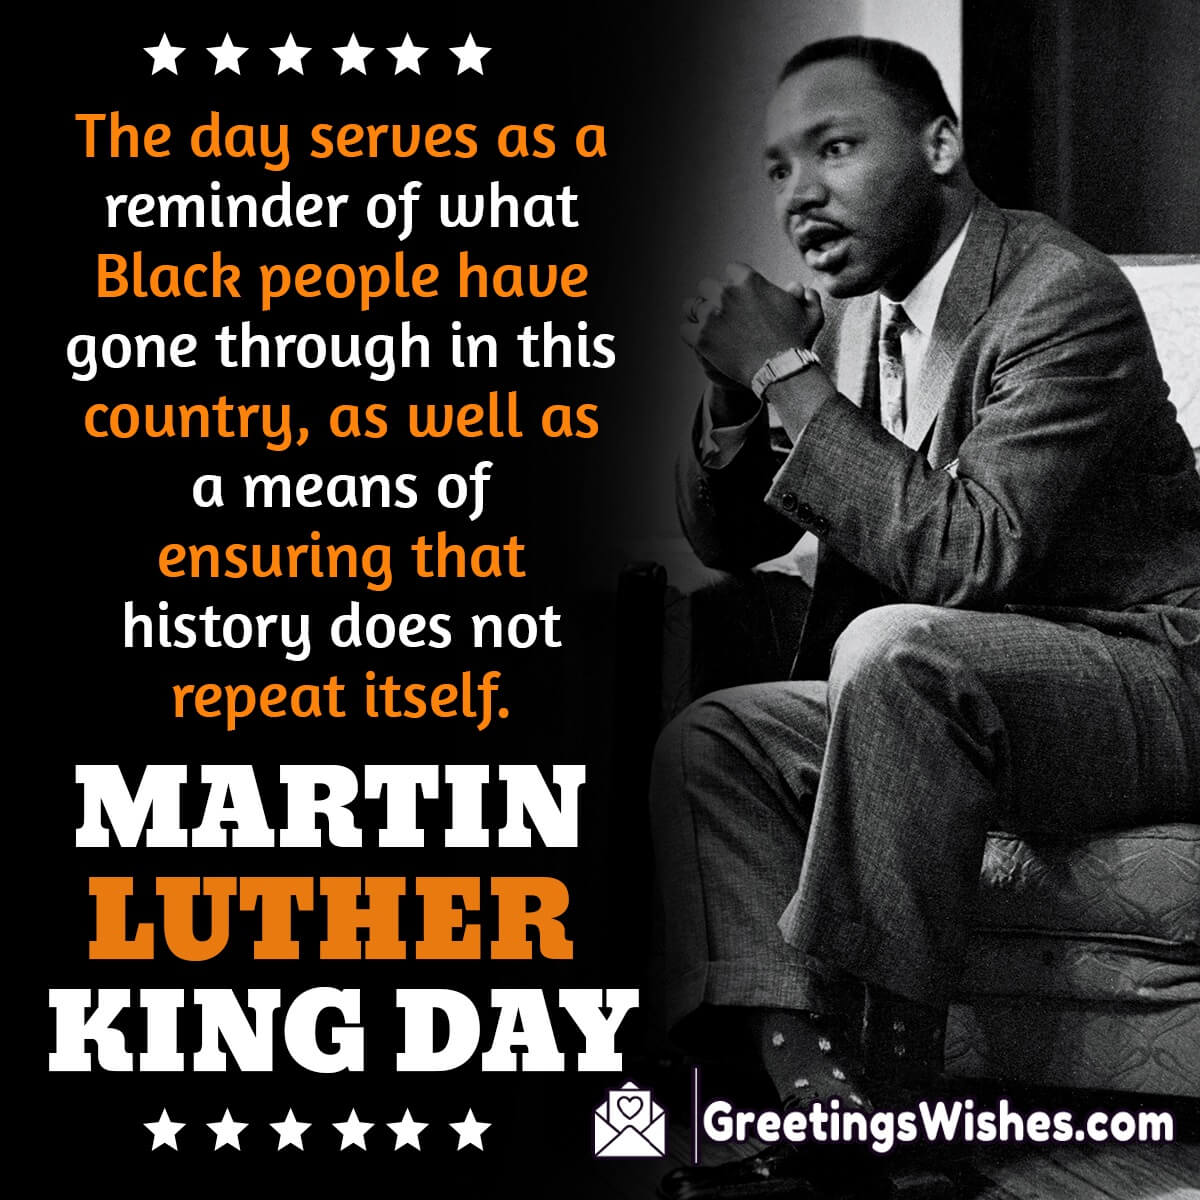 Martin Luther King Jr Day Quote